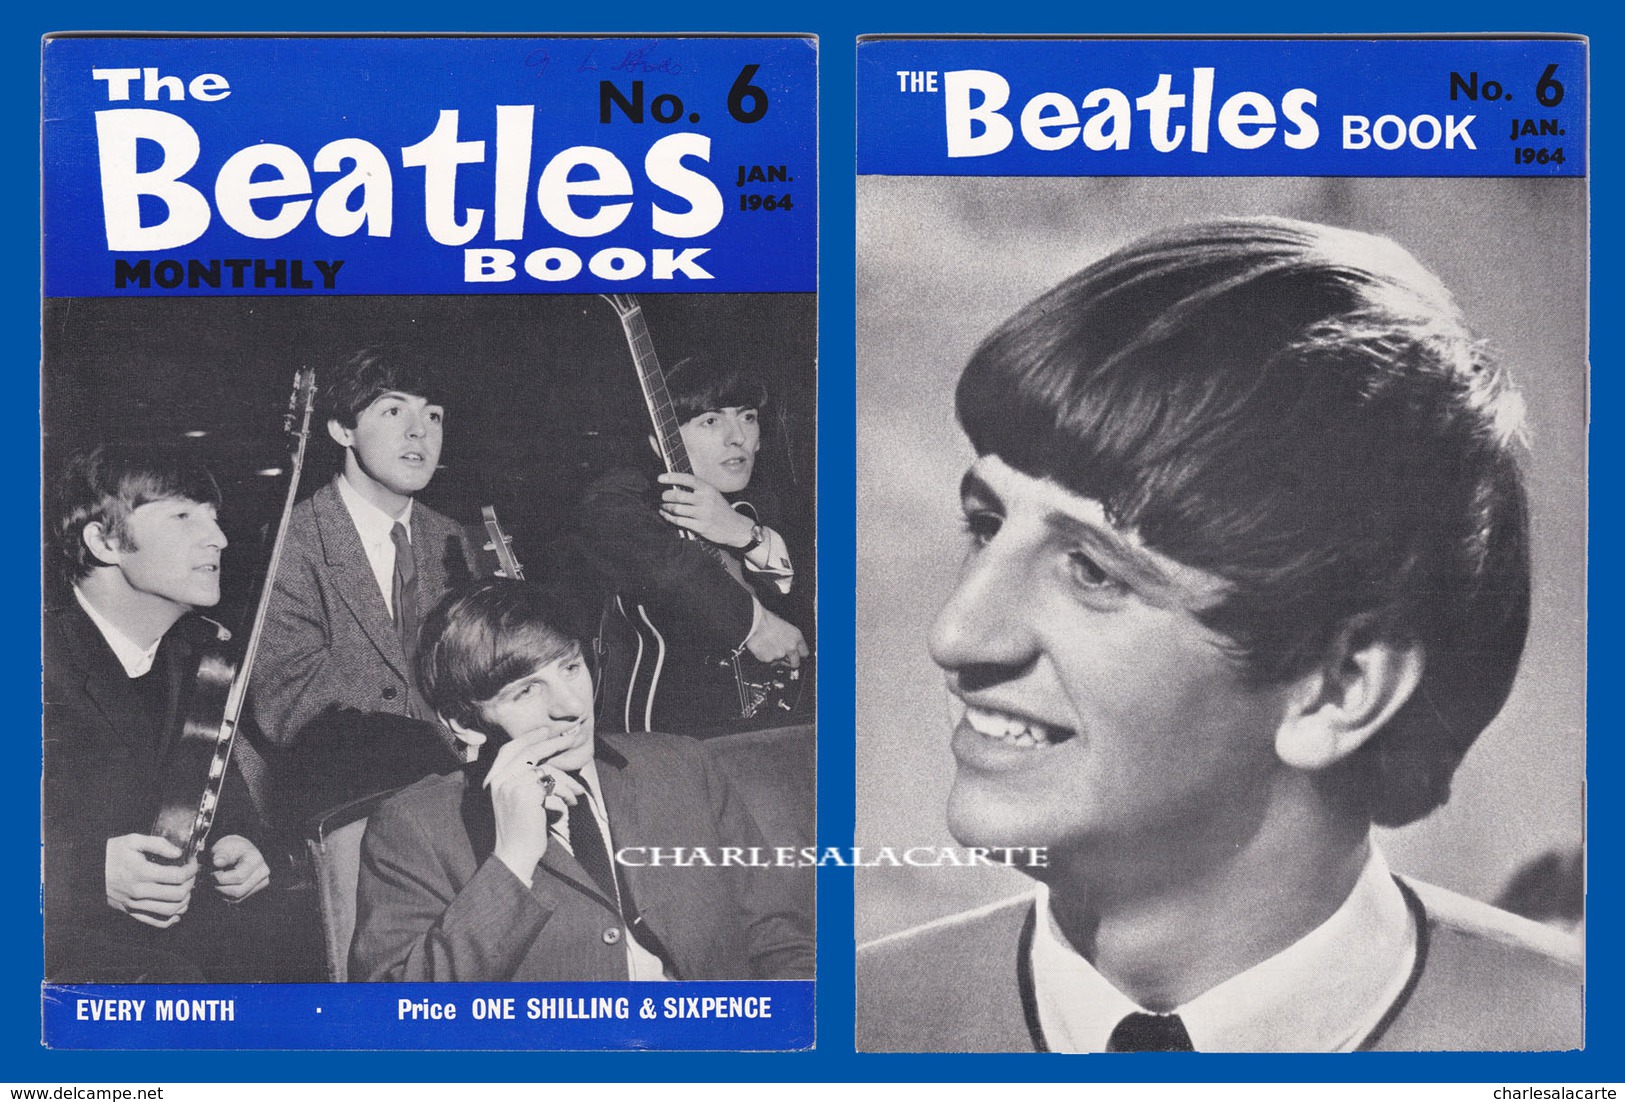 1964 JANUARY THE BEATLES MONTHLY BOOK No.6 AUTHENTIC SUBERB CONDITION SEE THE SCAN - Entertainment